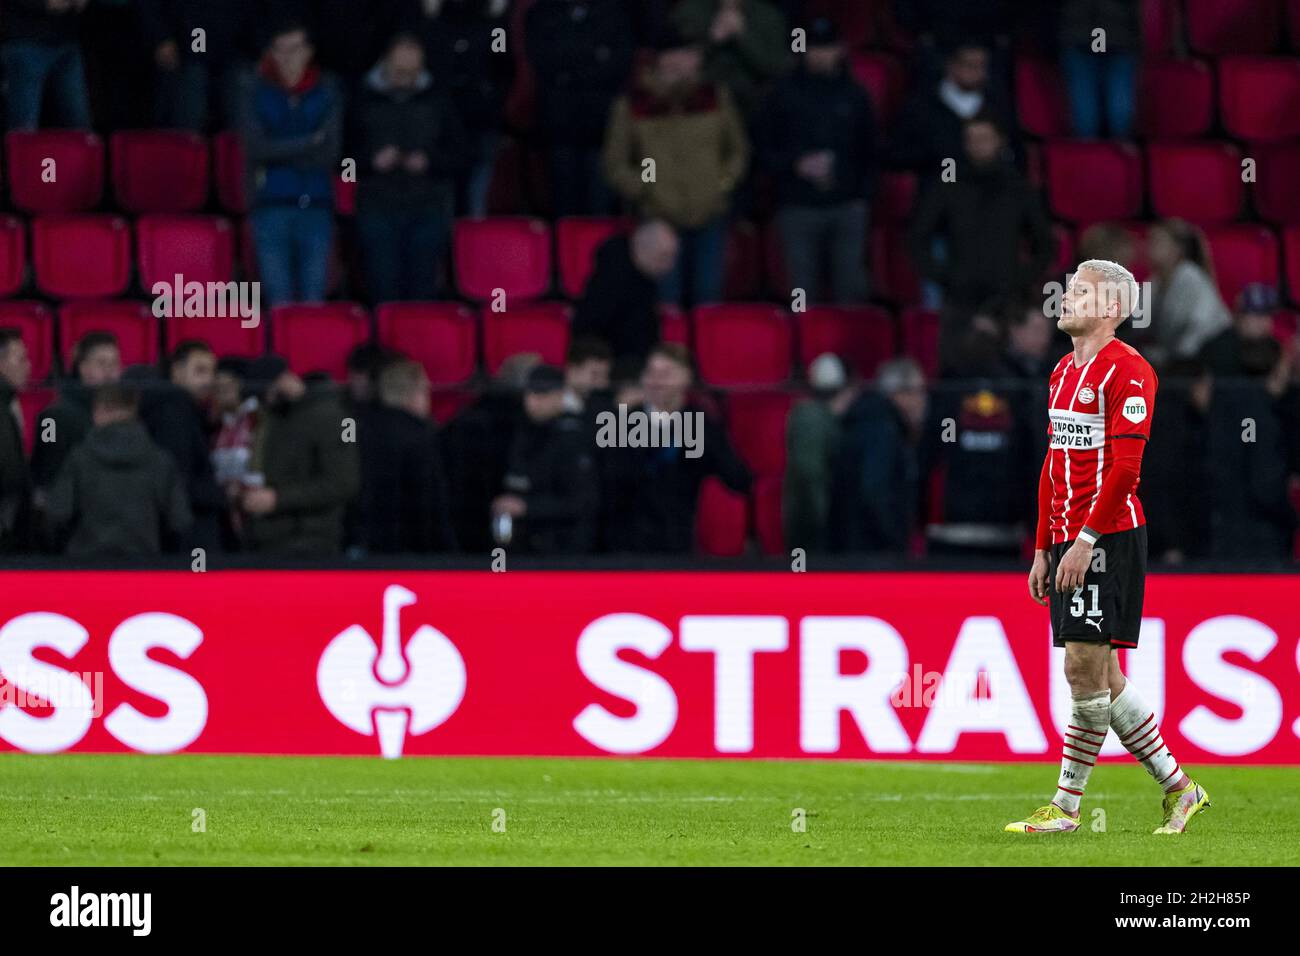 EINDHOVEN, Netherlands, 21-10-2021, football, Philips stadium, Europa League, season 2021 / 2022,  during the match PSV - Monaco, PSV player Philipp Max (Photo by Pro Shots/Sipa USA) *** World Rights Except Austria and The Netherlands *** Stock Photo